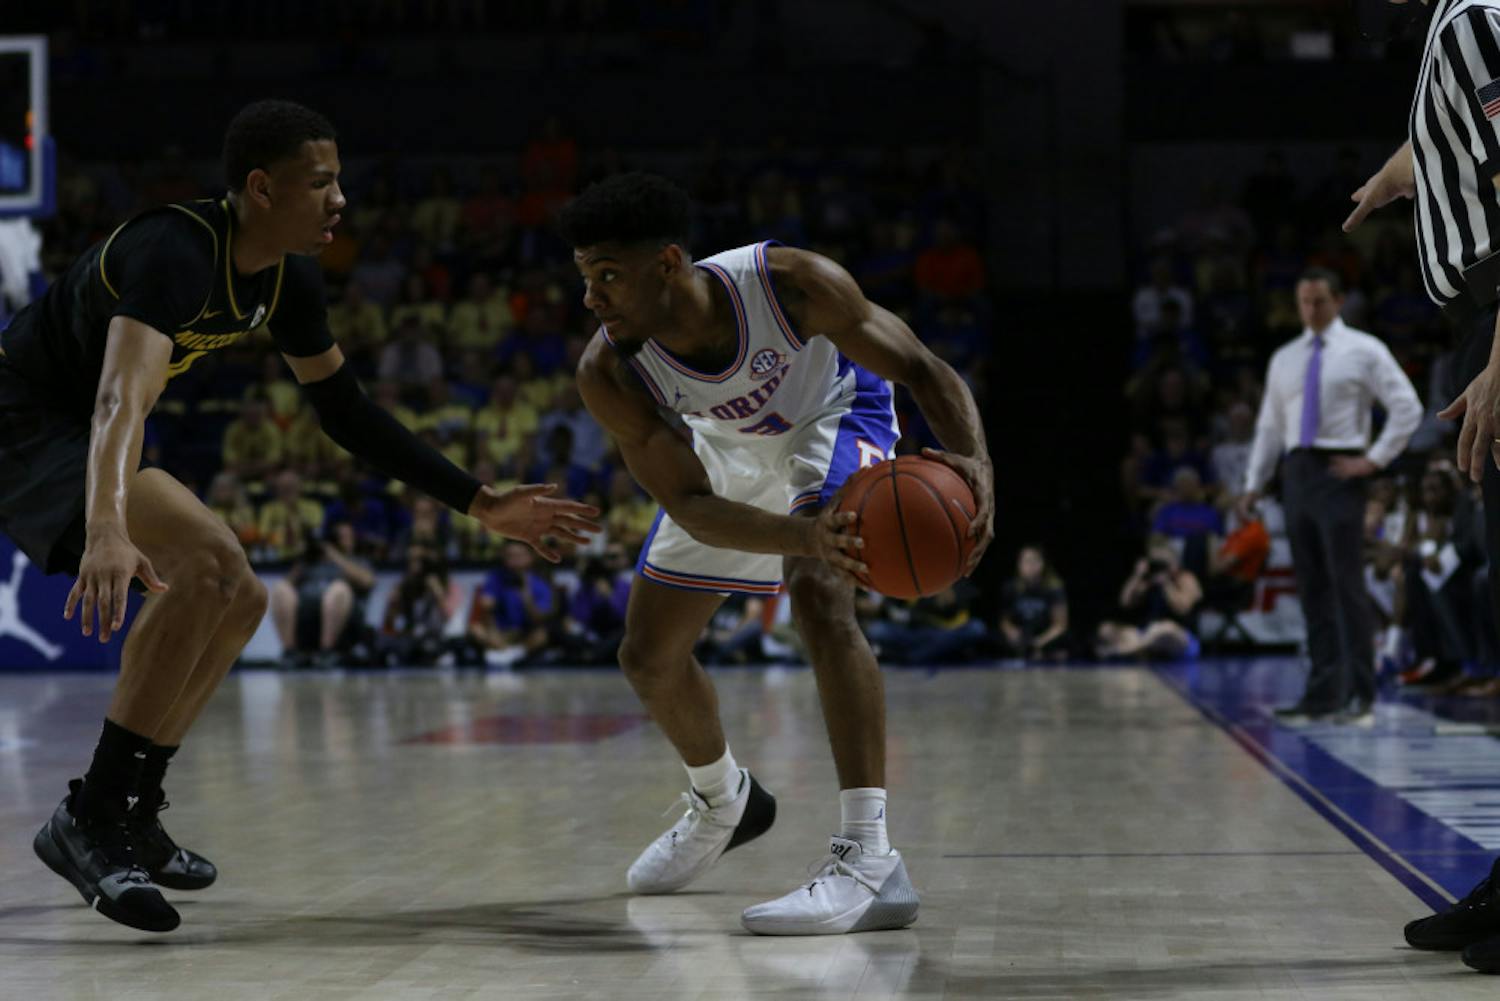 Florida guard Jalen Hudson scored a team-high 13 points in UF's 61-55 loss to Georgia on Saturday at the O'Connell Center.